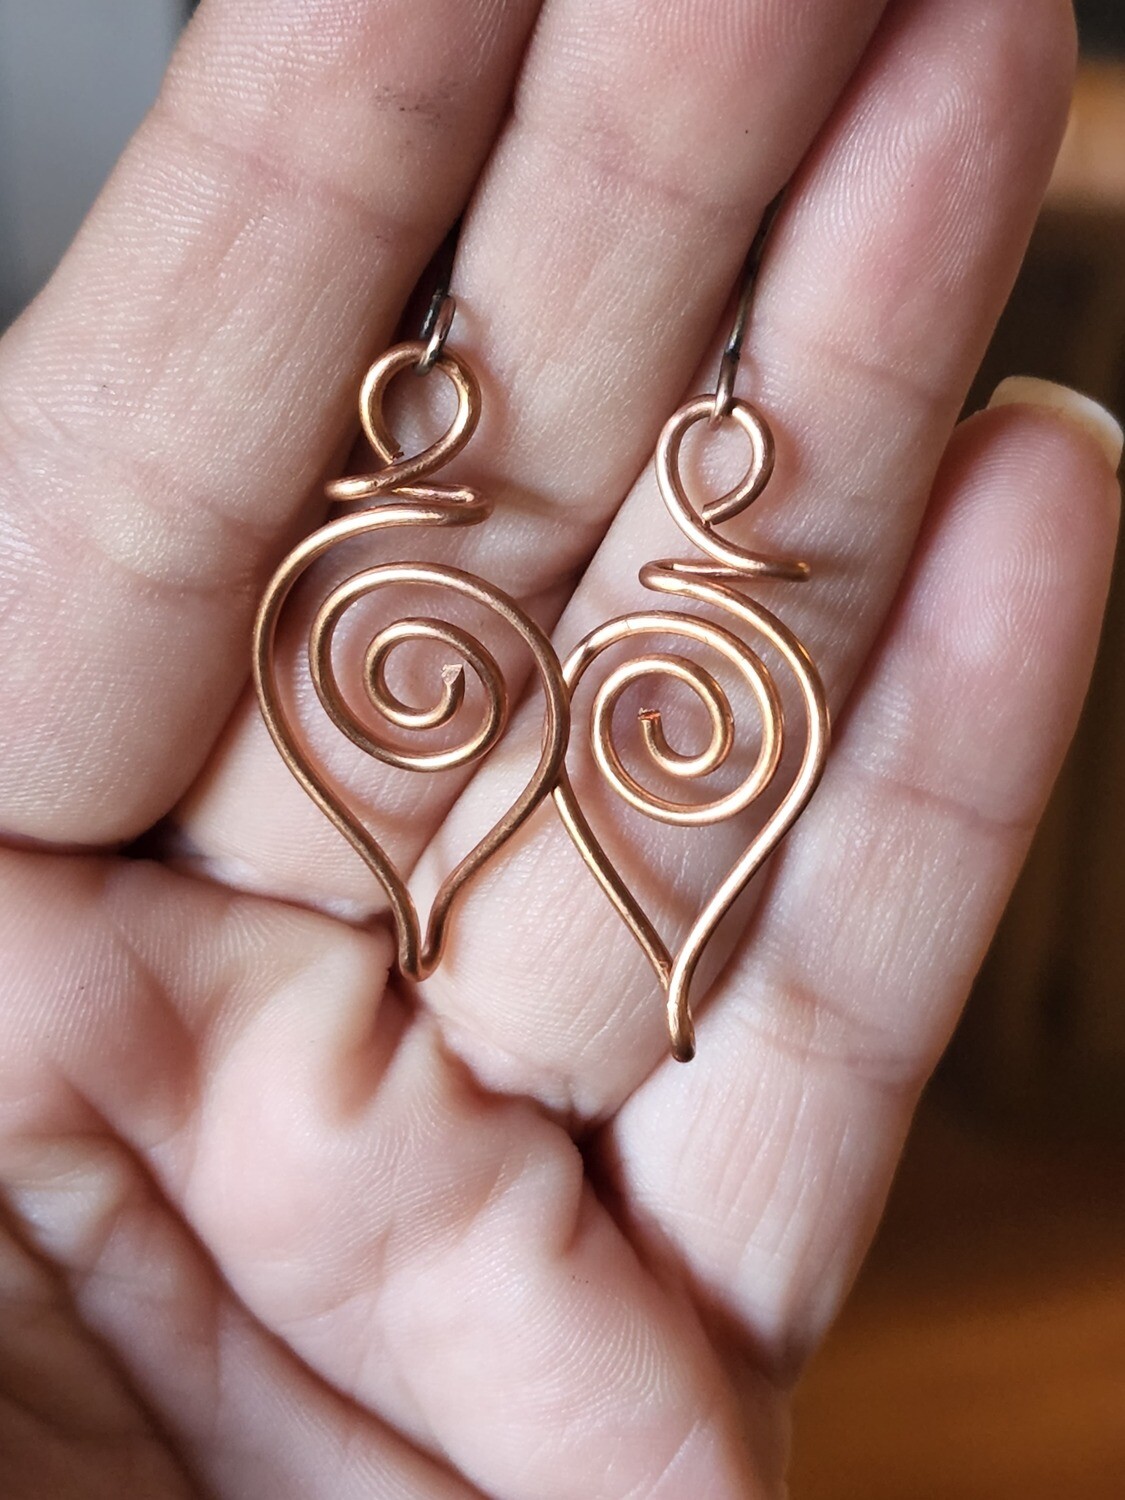 Copper Spiral Earrings - The Path